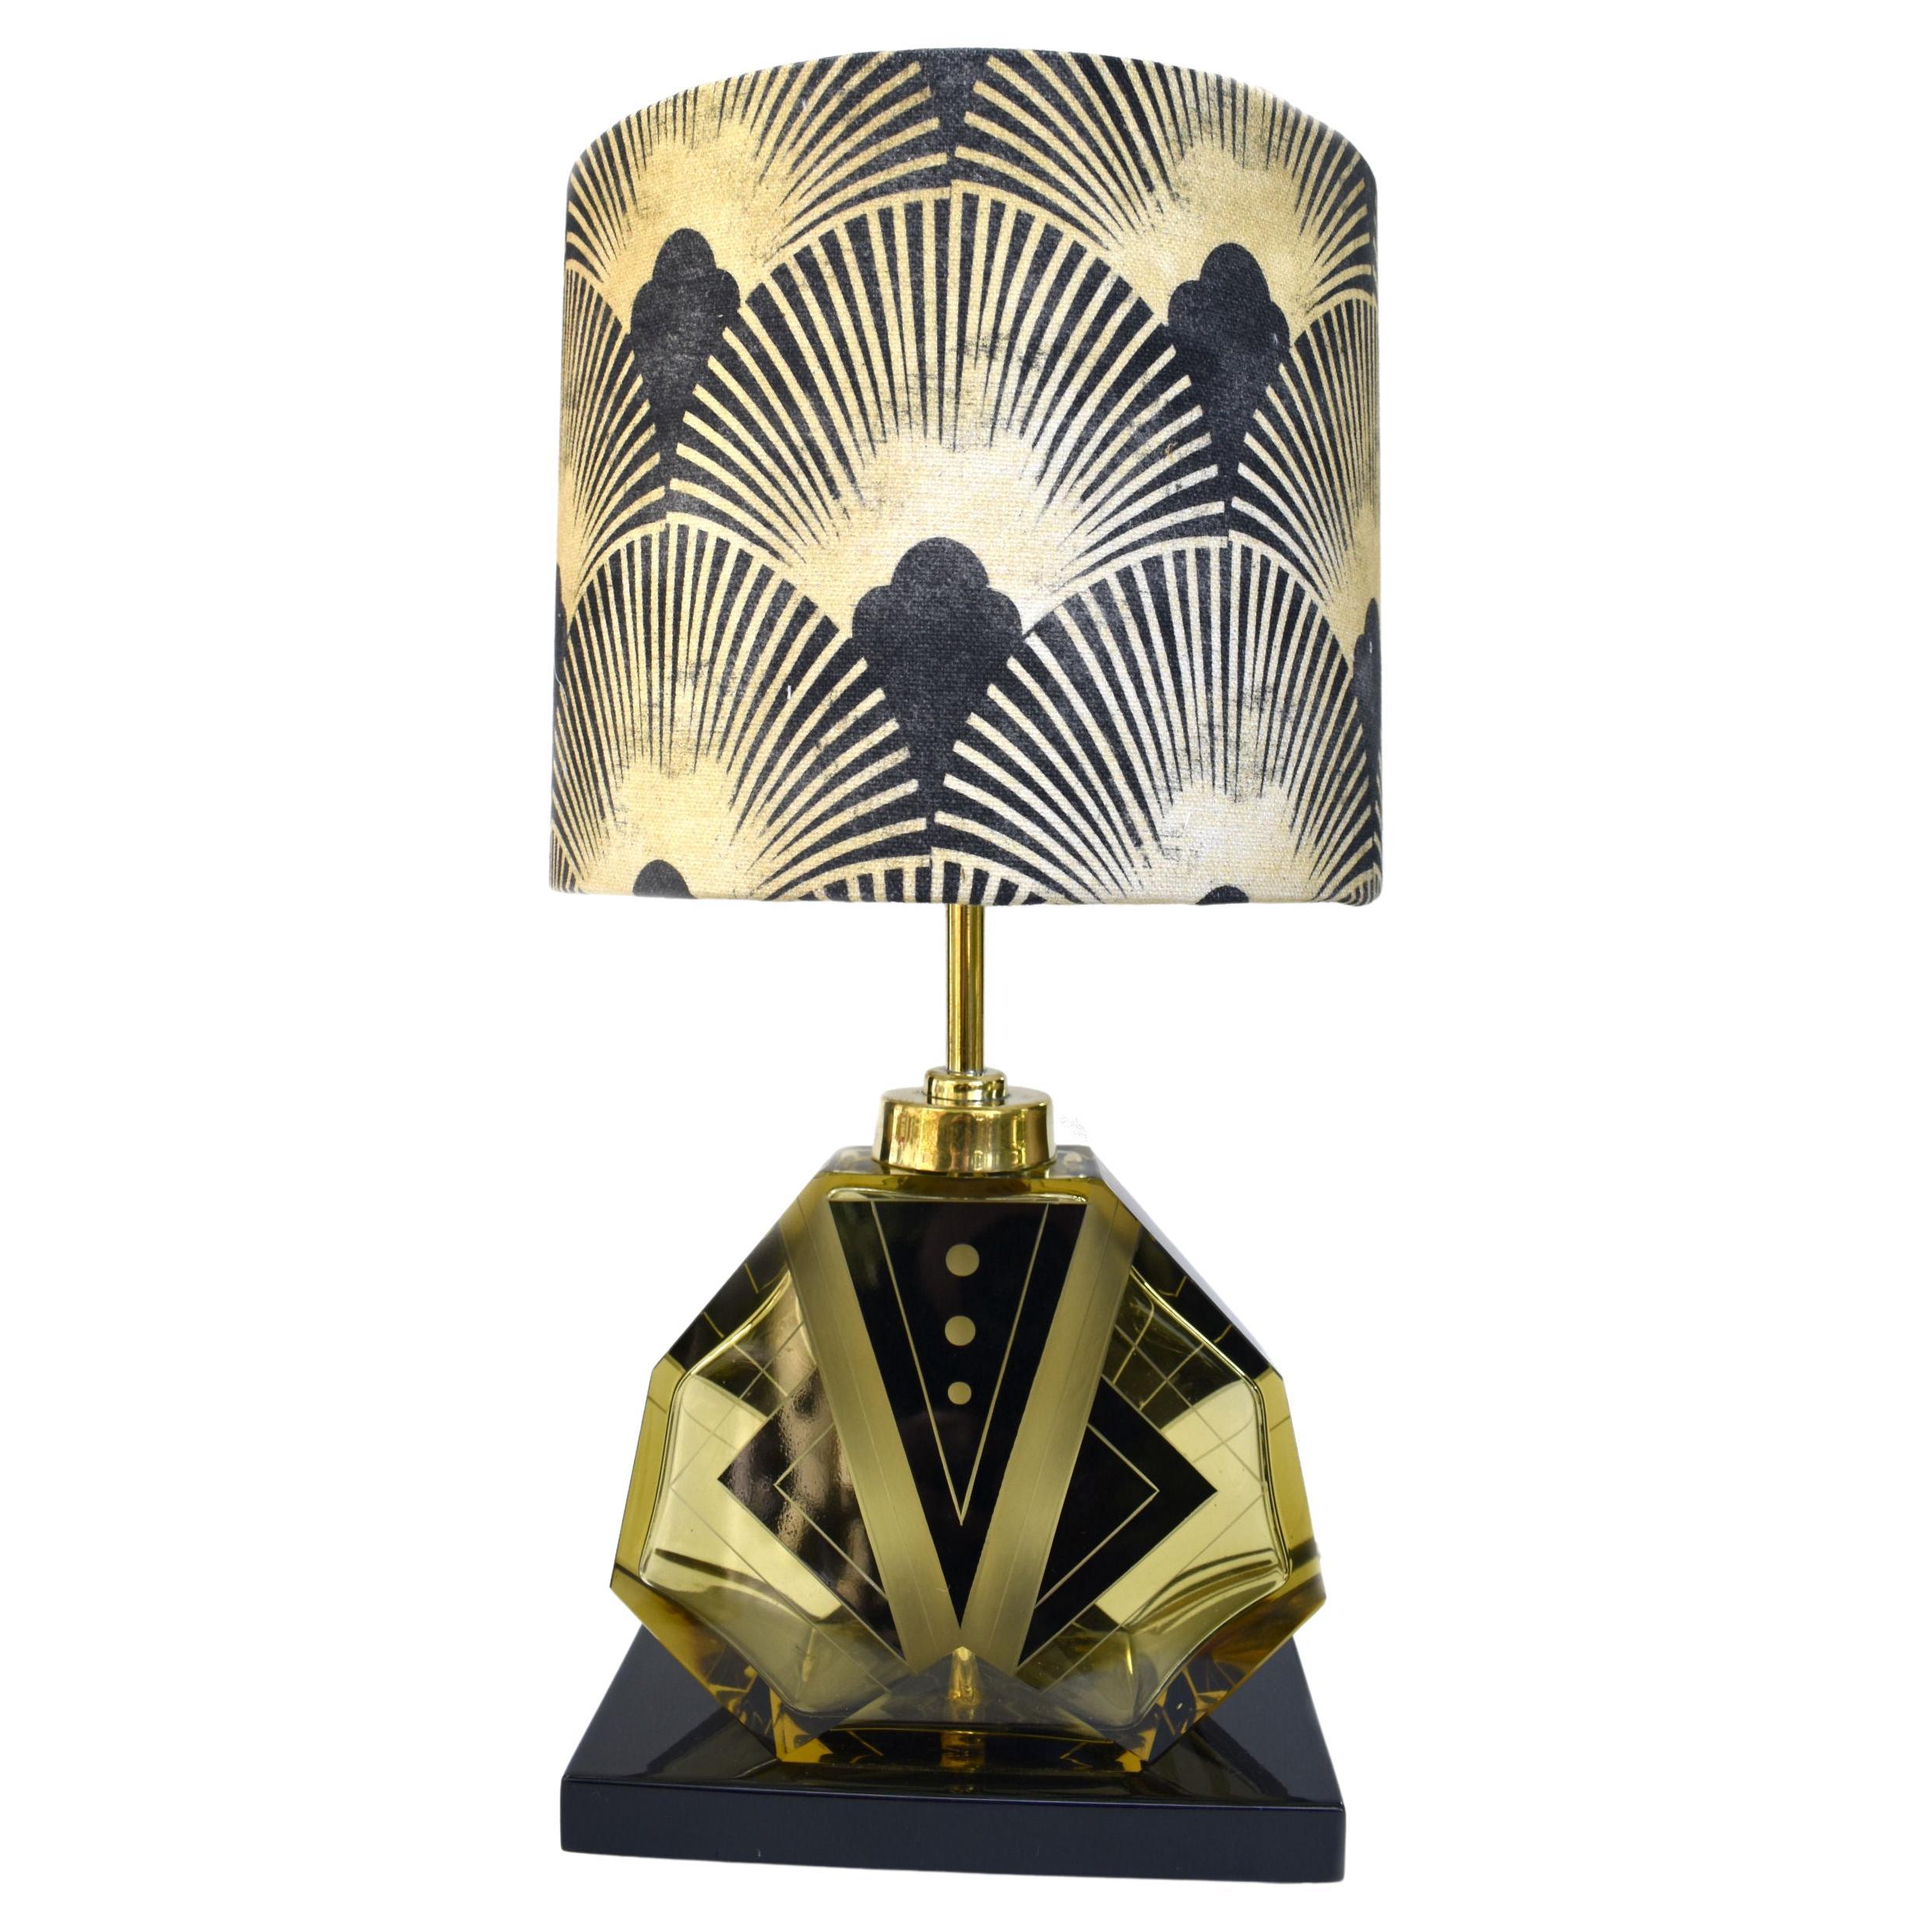 Art Deco Superb Iconic Glass Table Lamp by Karl Palda, C1930